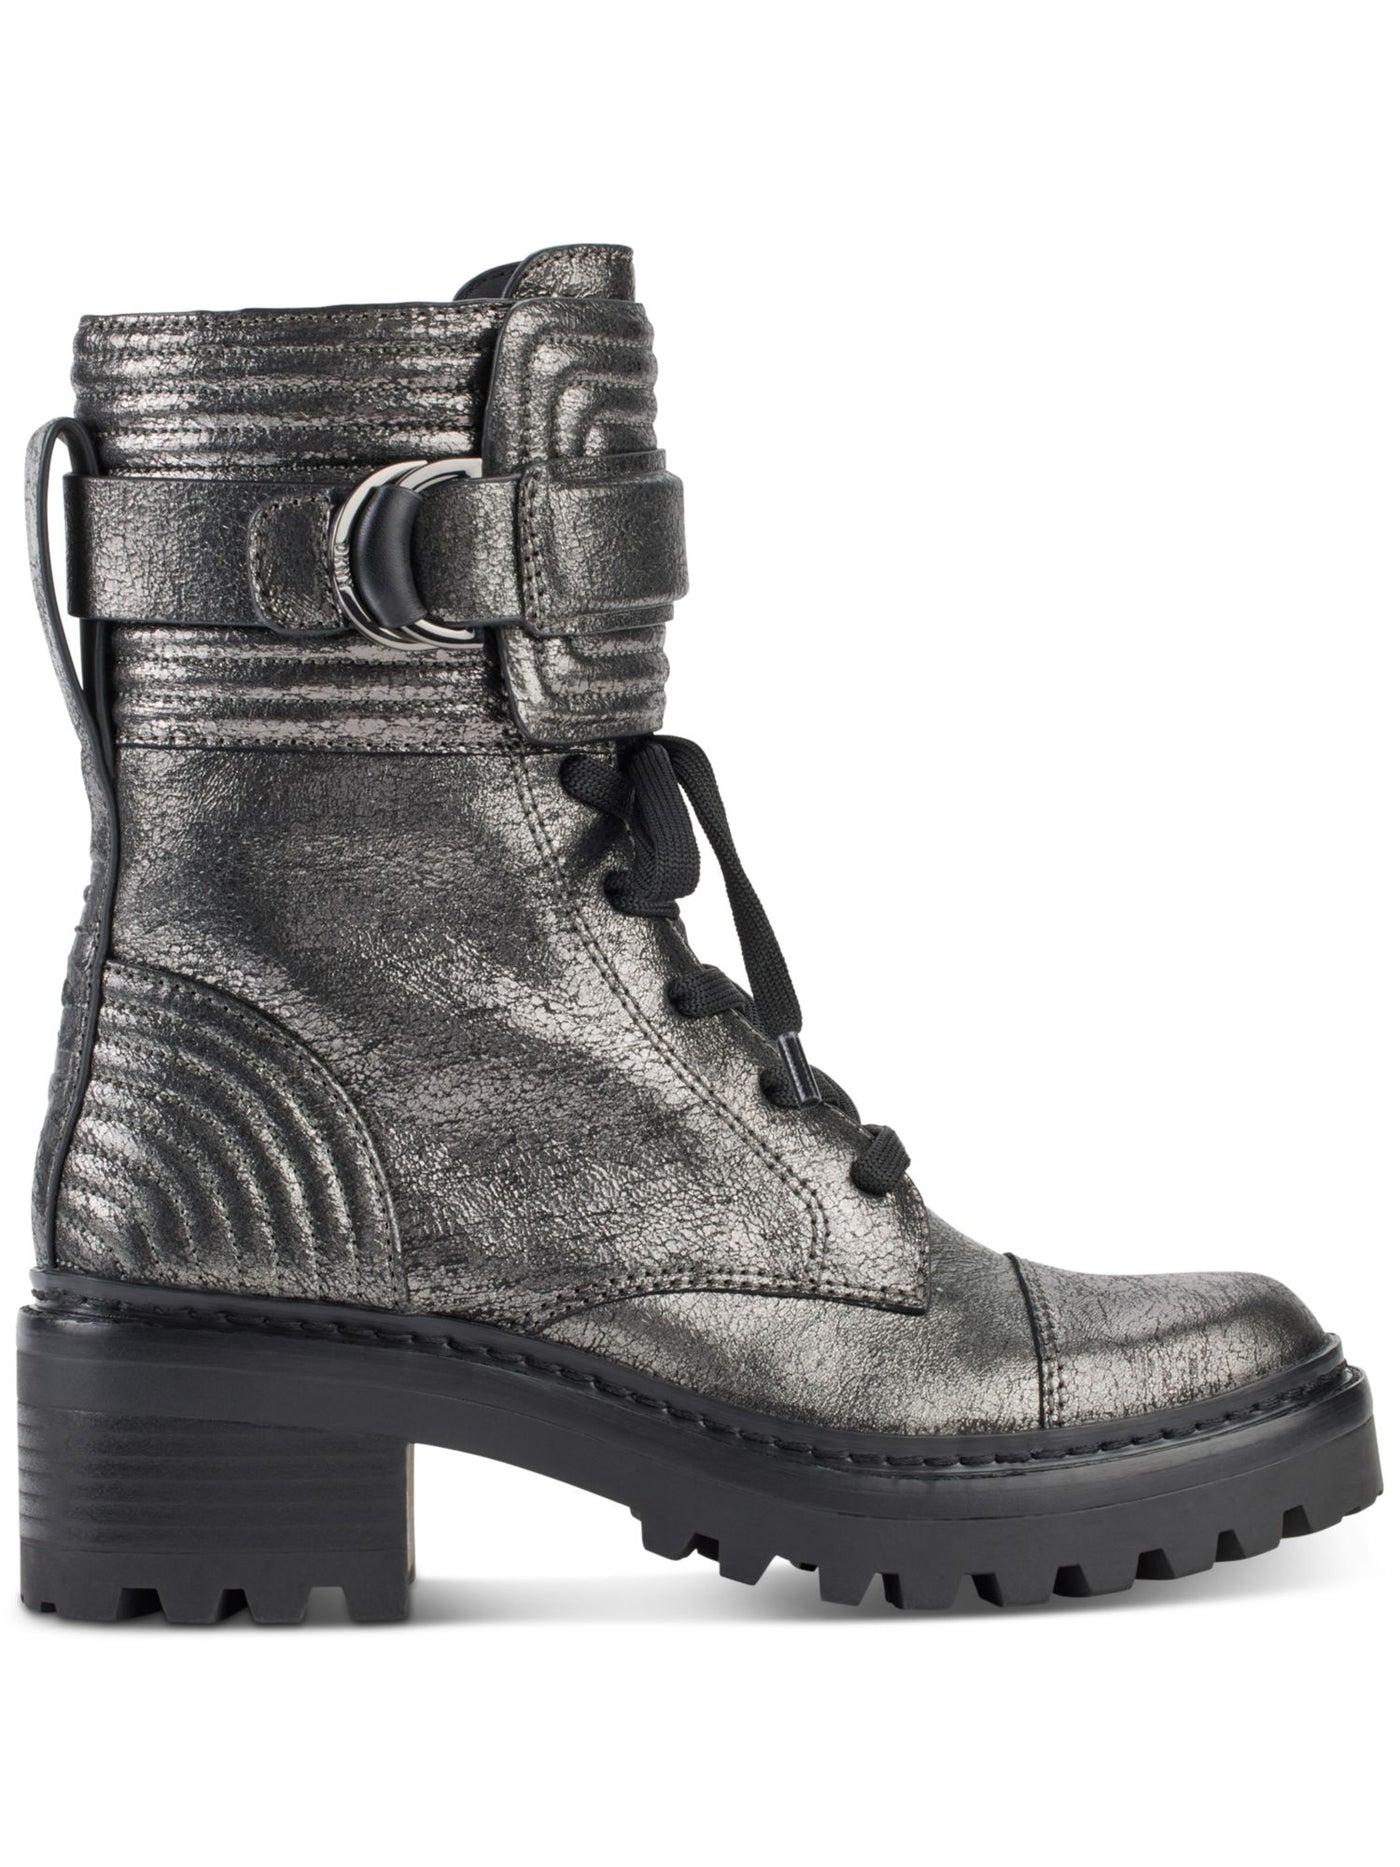 DKNY Womens Silver Buckle Accent Metallic Basia Round Toe Block Heel Zip-Up Leather Combat Boots 8.5